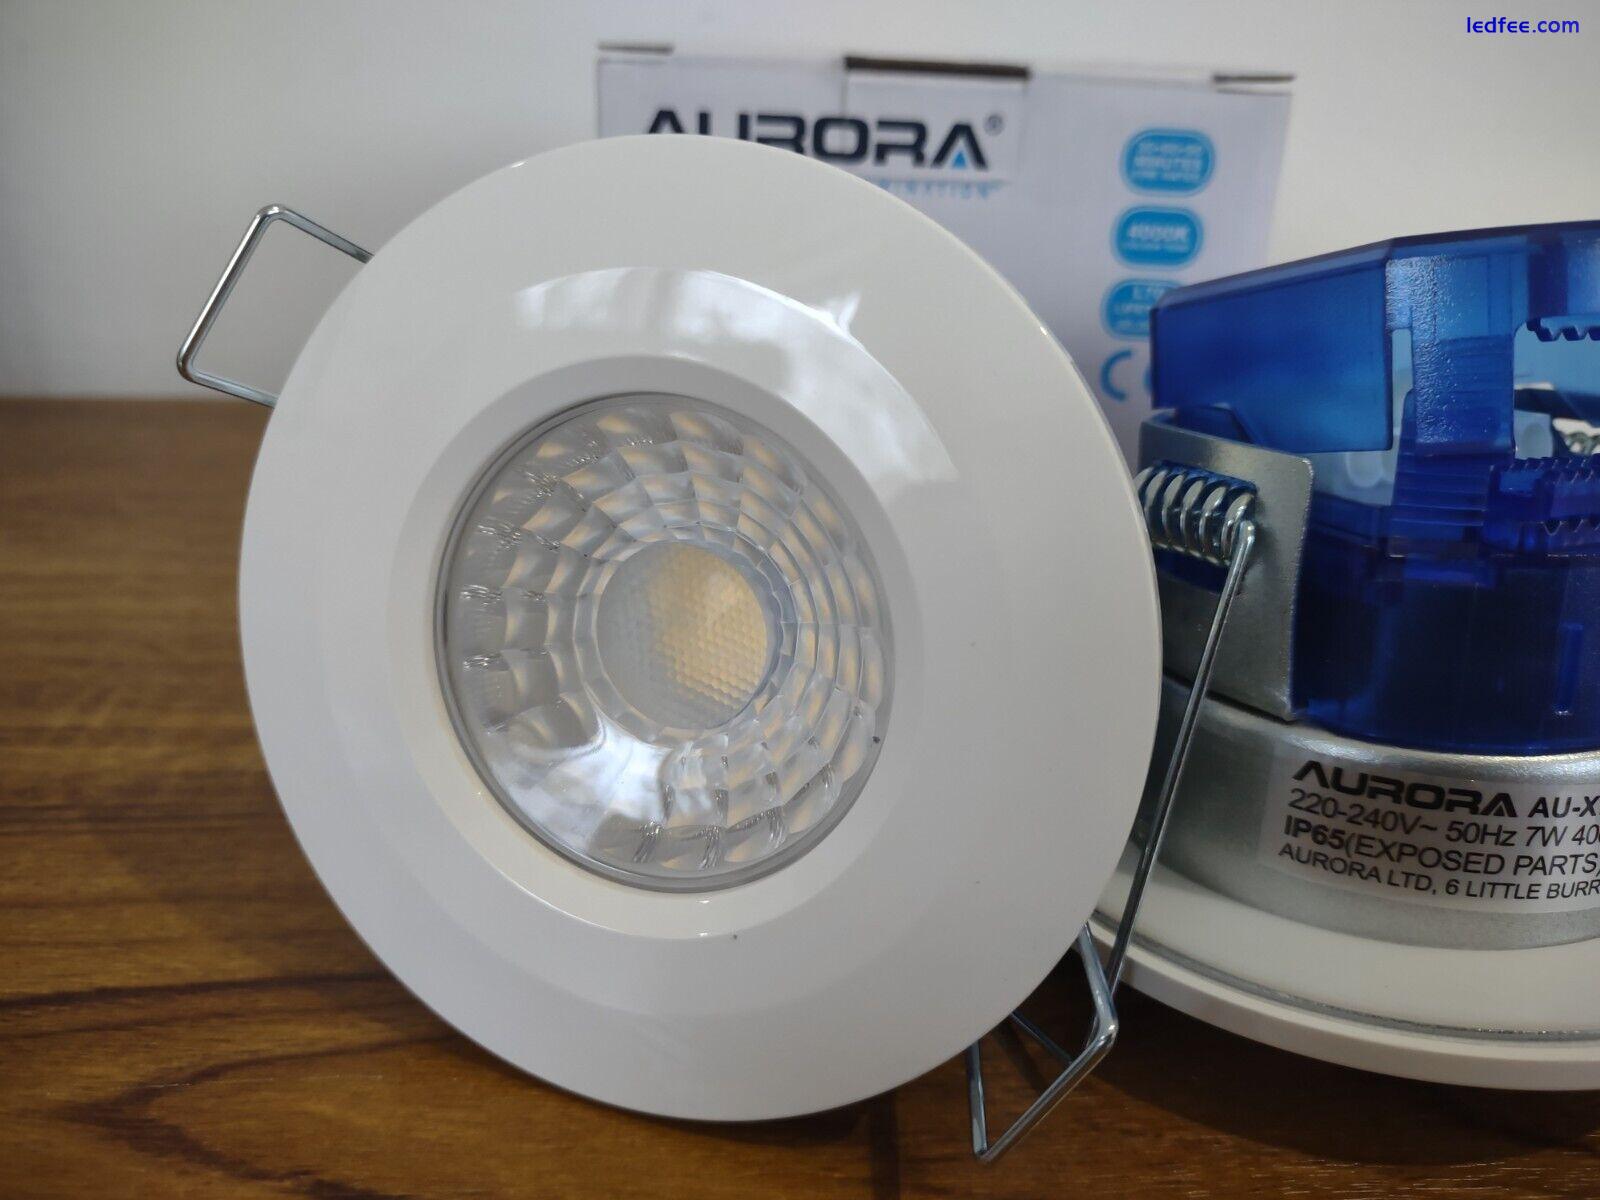 10x LED Downlight 7w Cool White 4000k Fire Rated IP65 240v Ceiling Aurora X7 4 